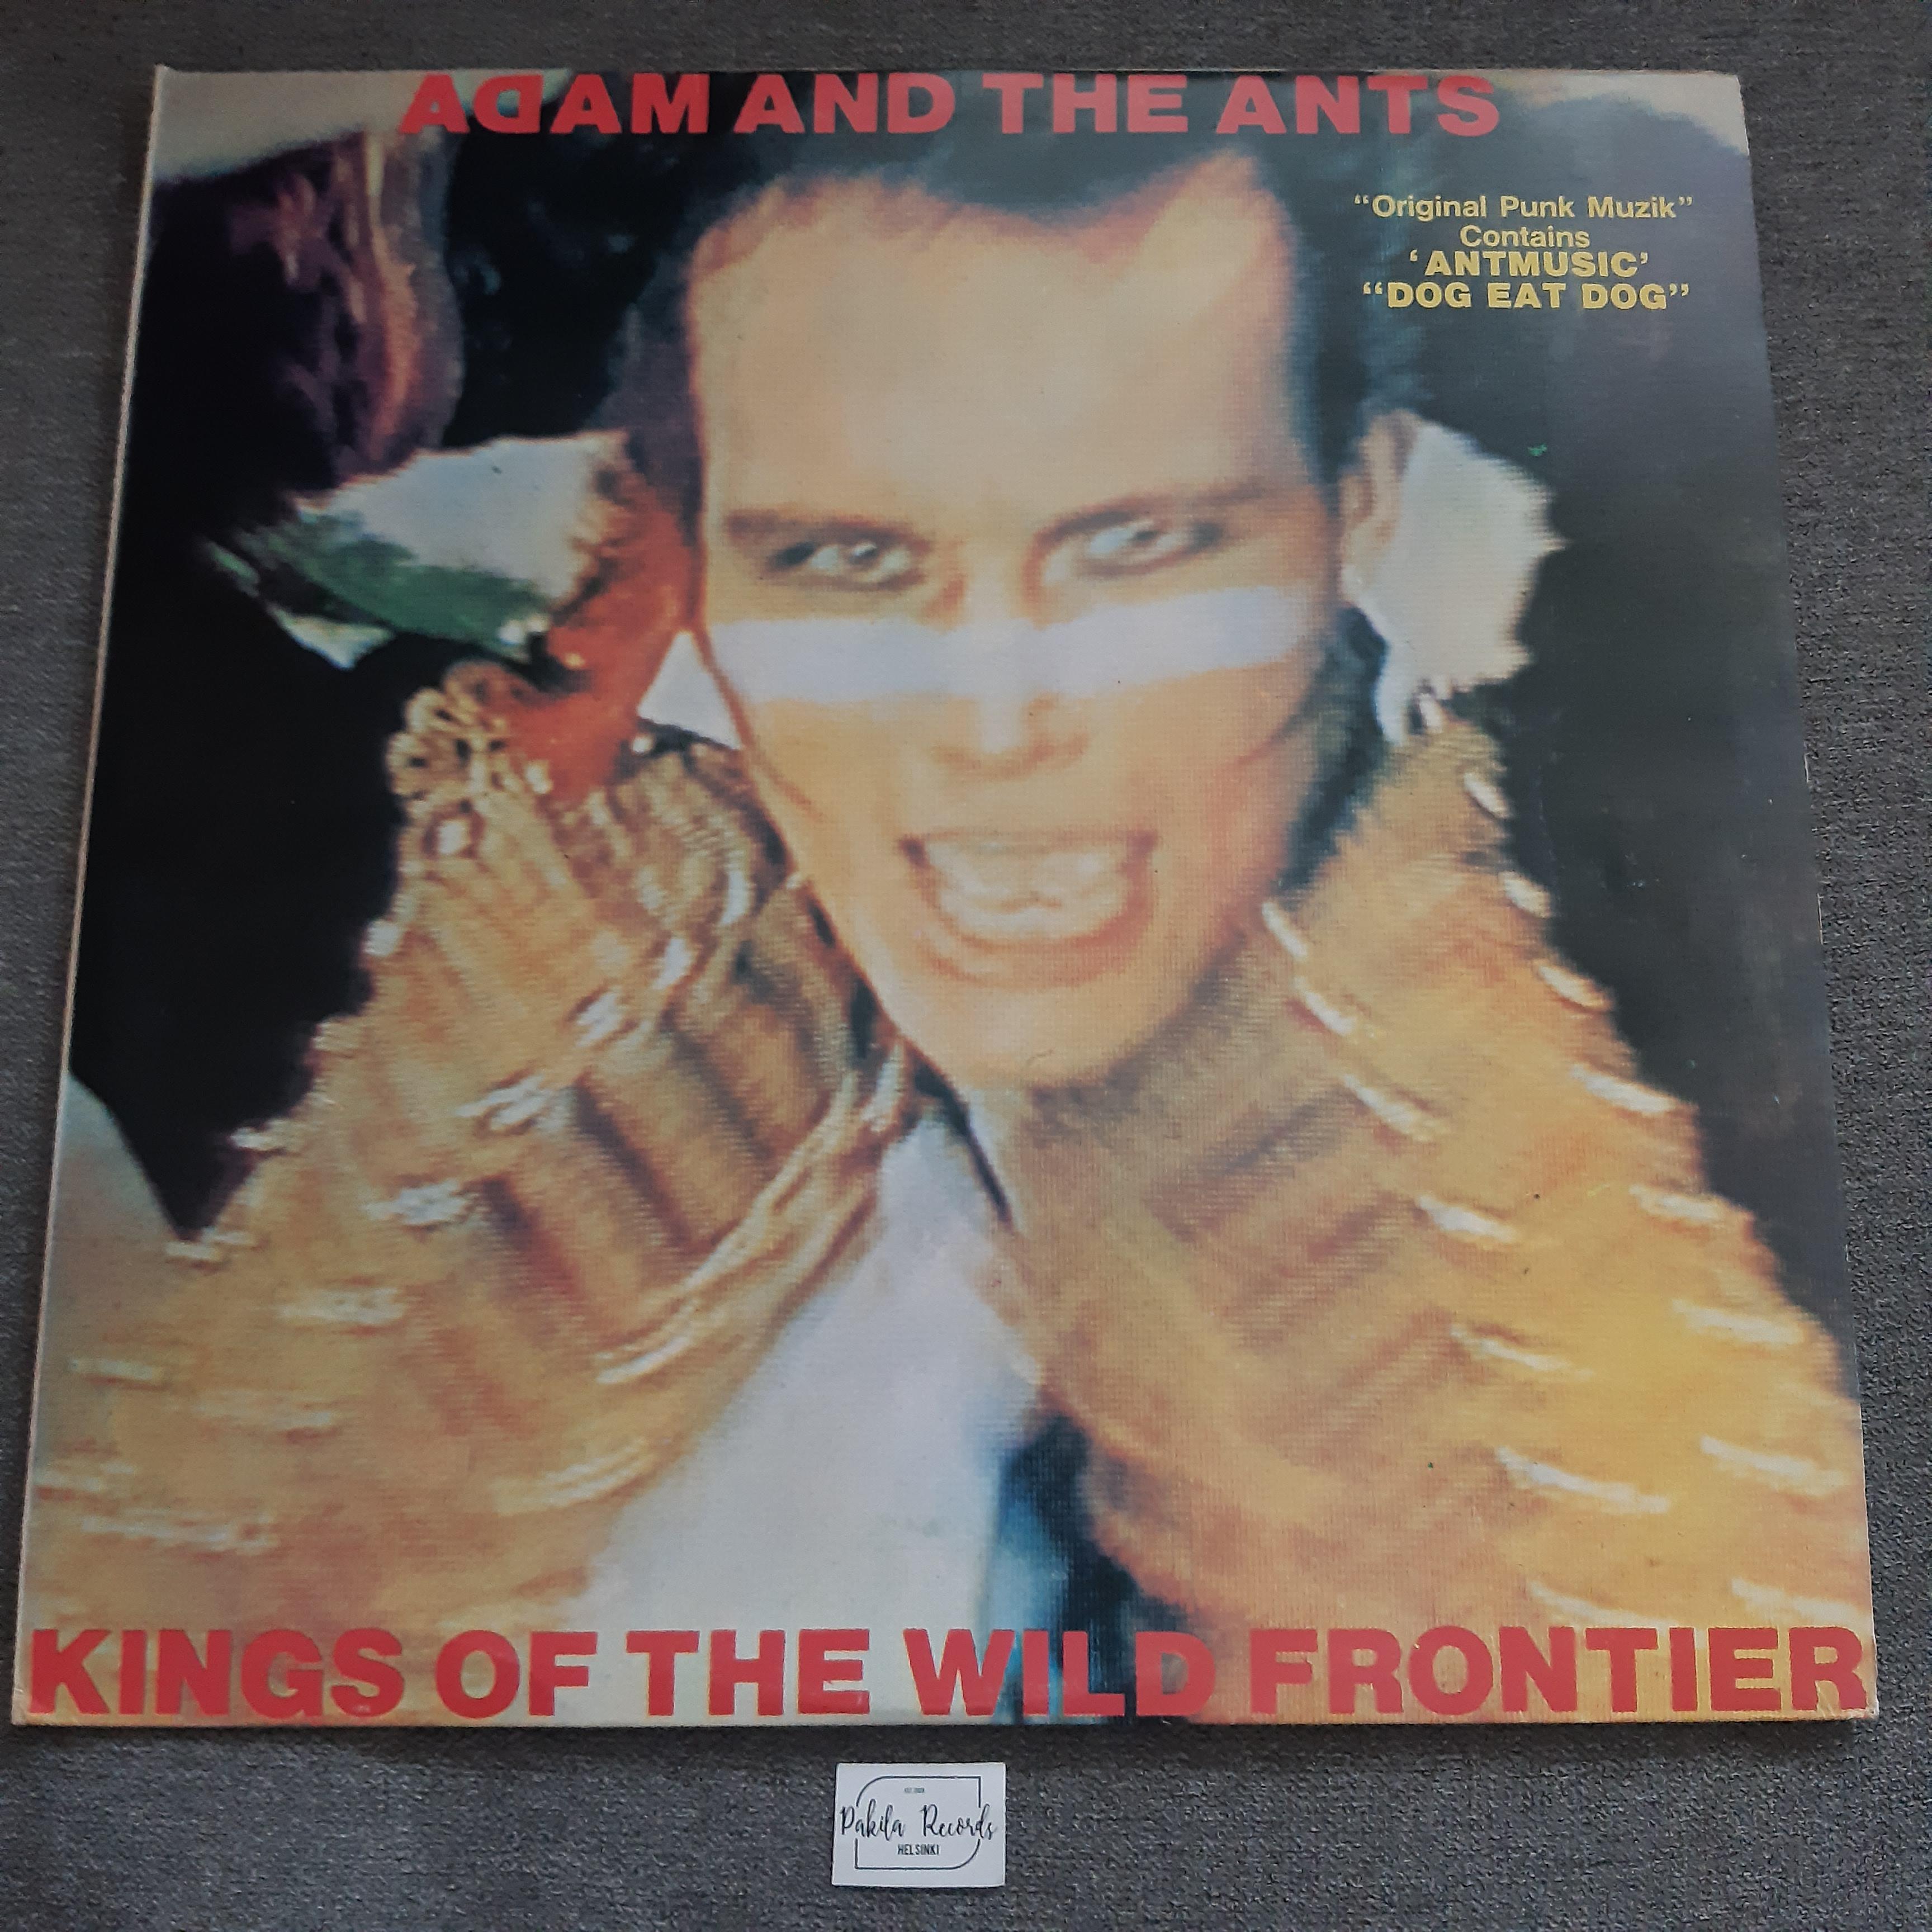 Adam And The Ants - Kings Of The Wild Frontier - LP (käytetty)